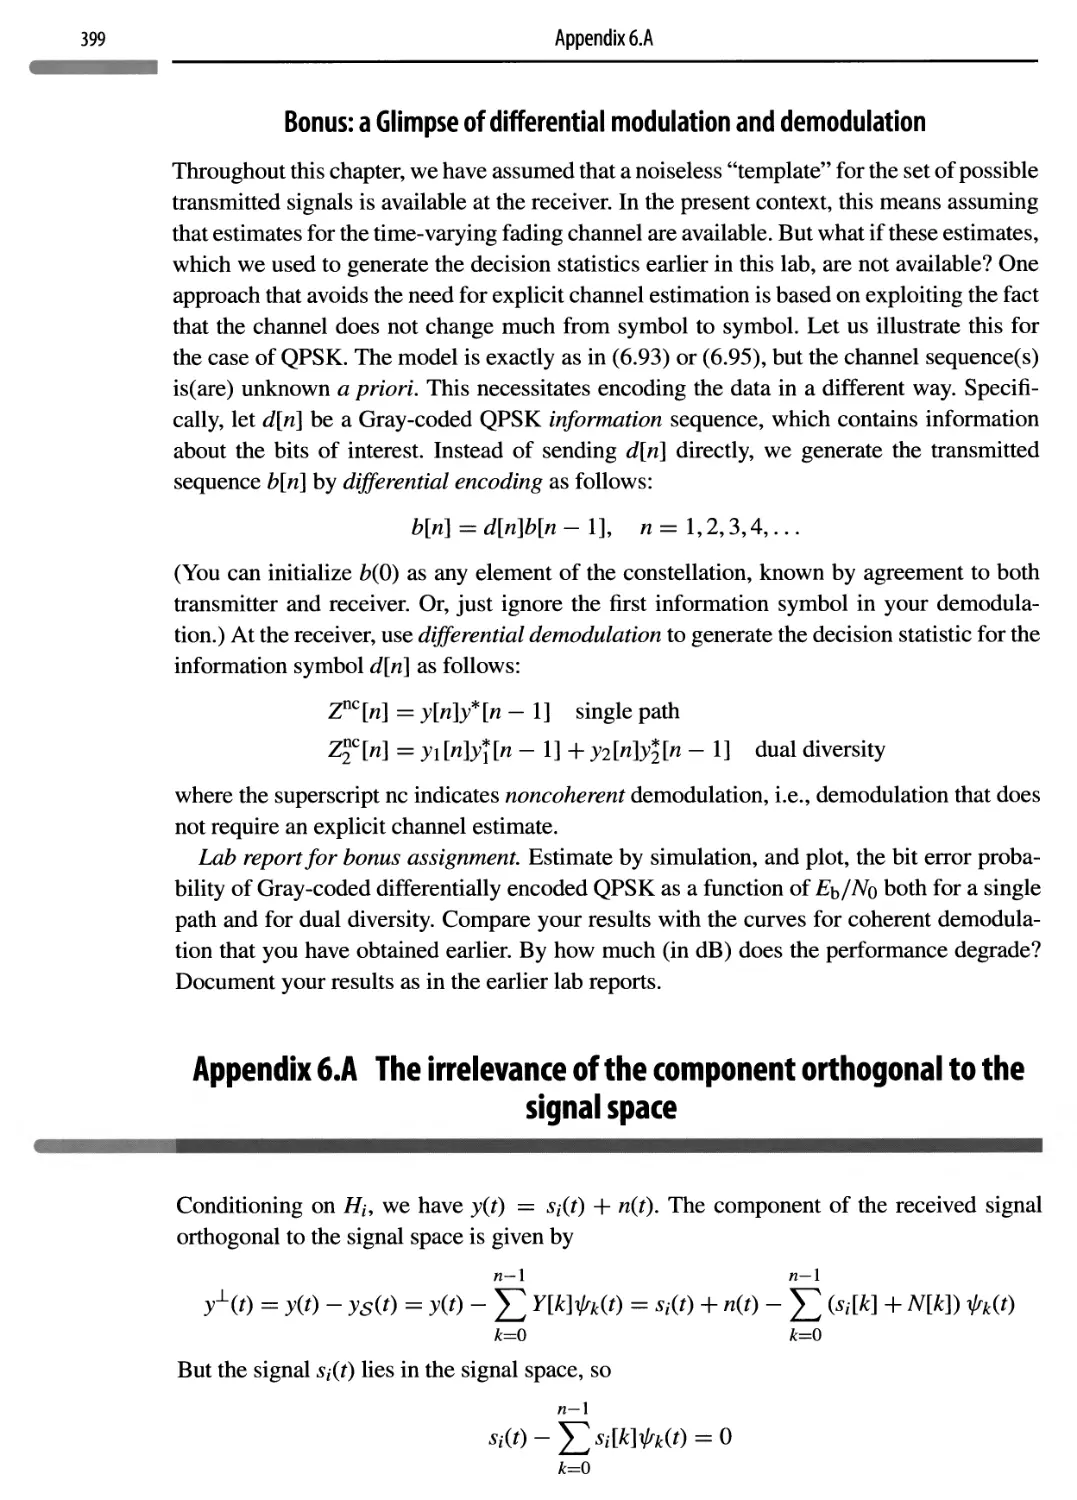 Appendix 6. A The irrelevance of the component orthogonal to the signal space 399